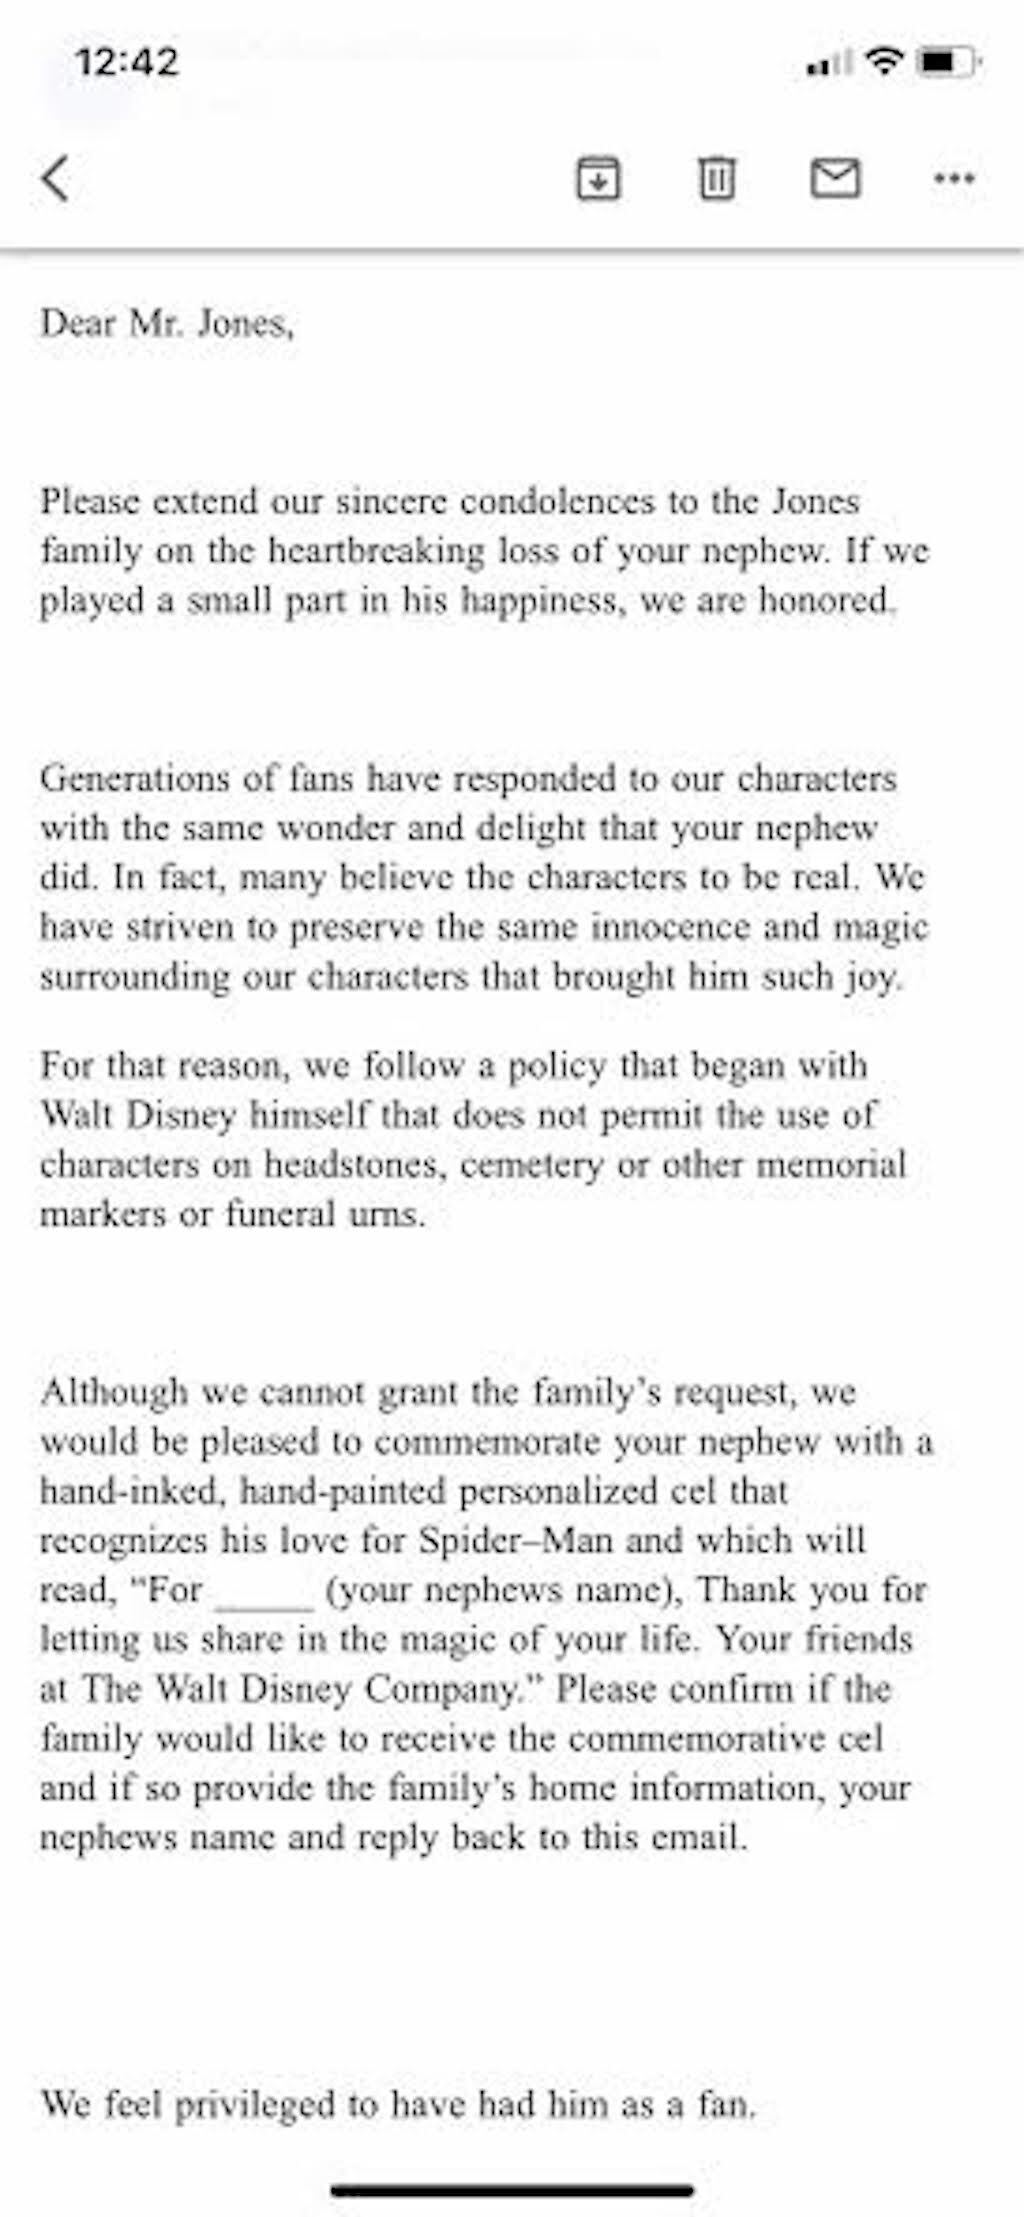 disney denies father's request to put spider-man on son's grave